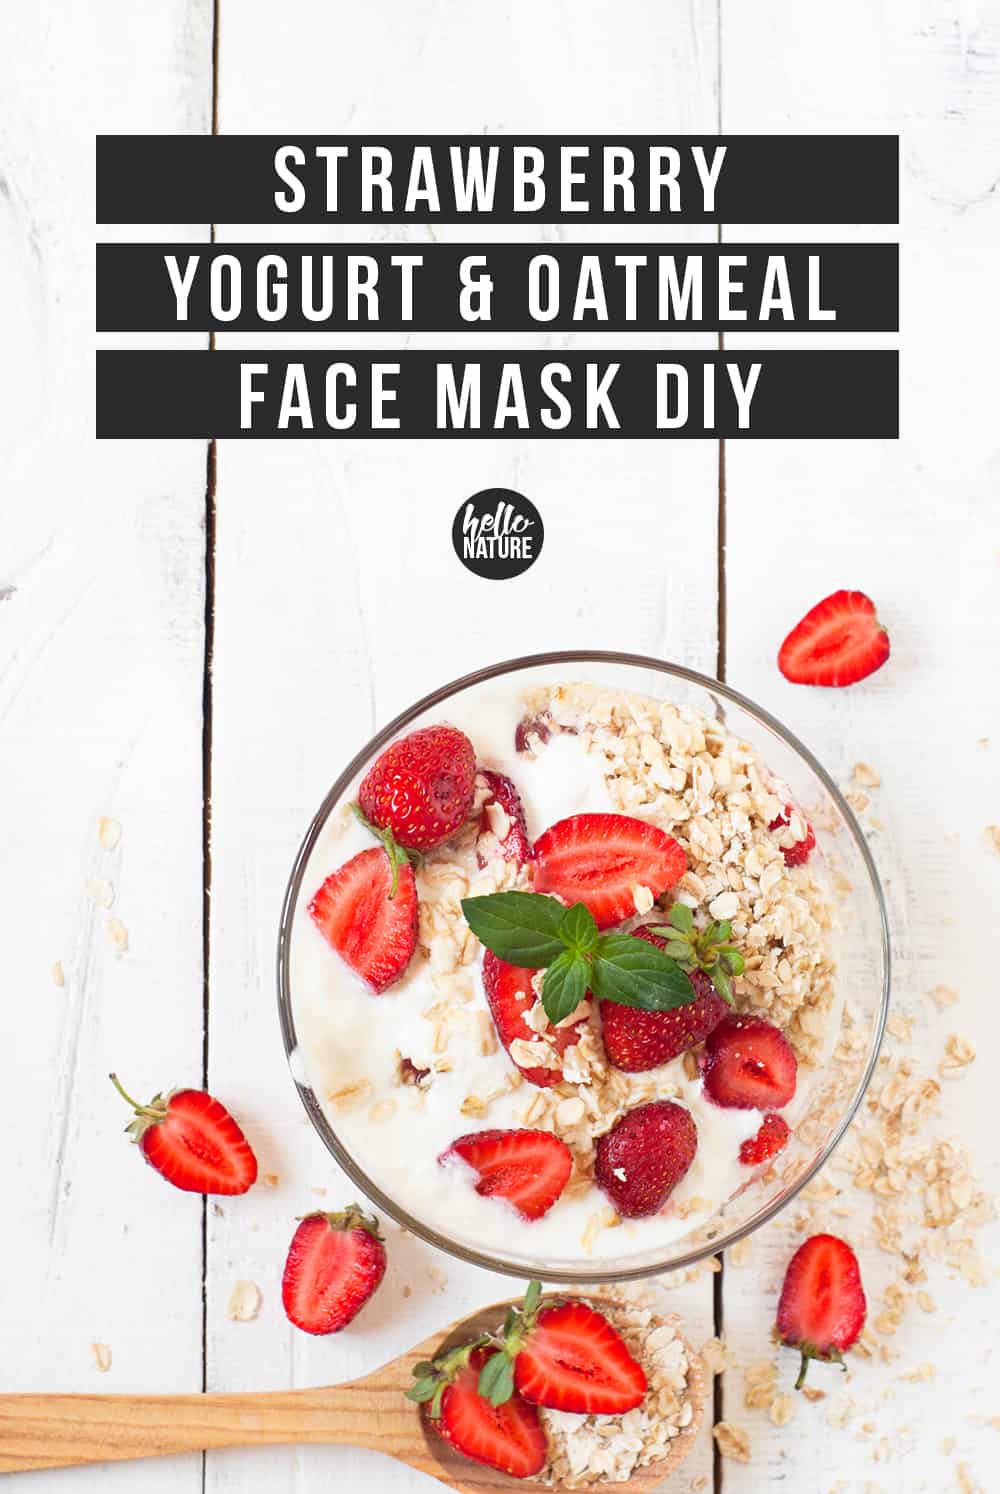 If you want a natural way to relieve dry, irritated skin, you'll love this homemade Strawberry Yogurt and Oatmeal Face Mask DIY. It's soothing and super easy to make with just three ingredients. Your face will reap the benefits from this simple DIY face mask at home in your PJs for less than the cost of a Starbucks latte. #OatmealFaceMask #StrawberryFaceMask #YogurtFaceMask #FaceMaskDIY #DIYFaceMask #DIYBeauty #BeautyDIY #AtHomeSpaNight #FrugalBeauty #BeautyHack #DrySkin